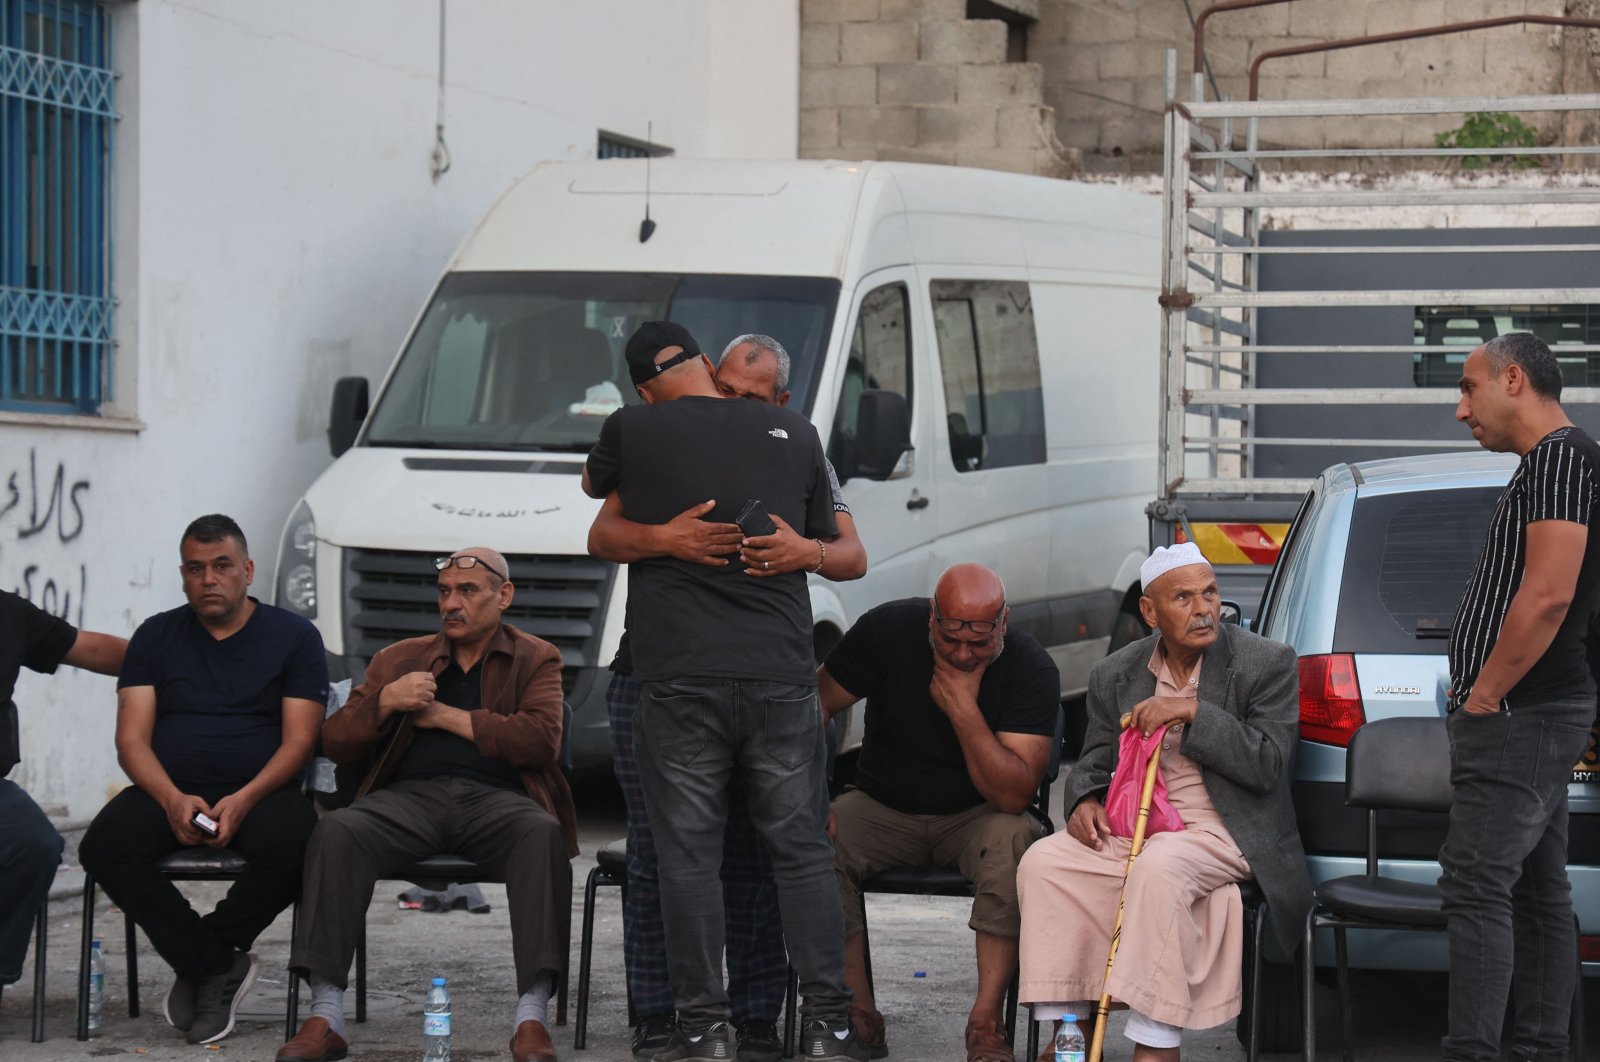 Relatives of a Palestinian killed by Israeli forces mourn outside a hospital in Jenin in the north of the occupied West Bank, Palestine, June 10, 2021. (AFP Photo)